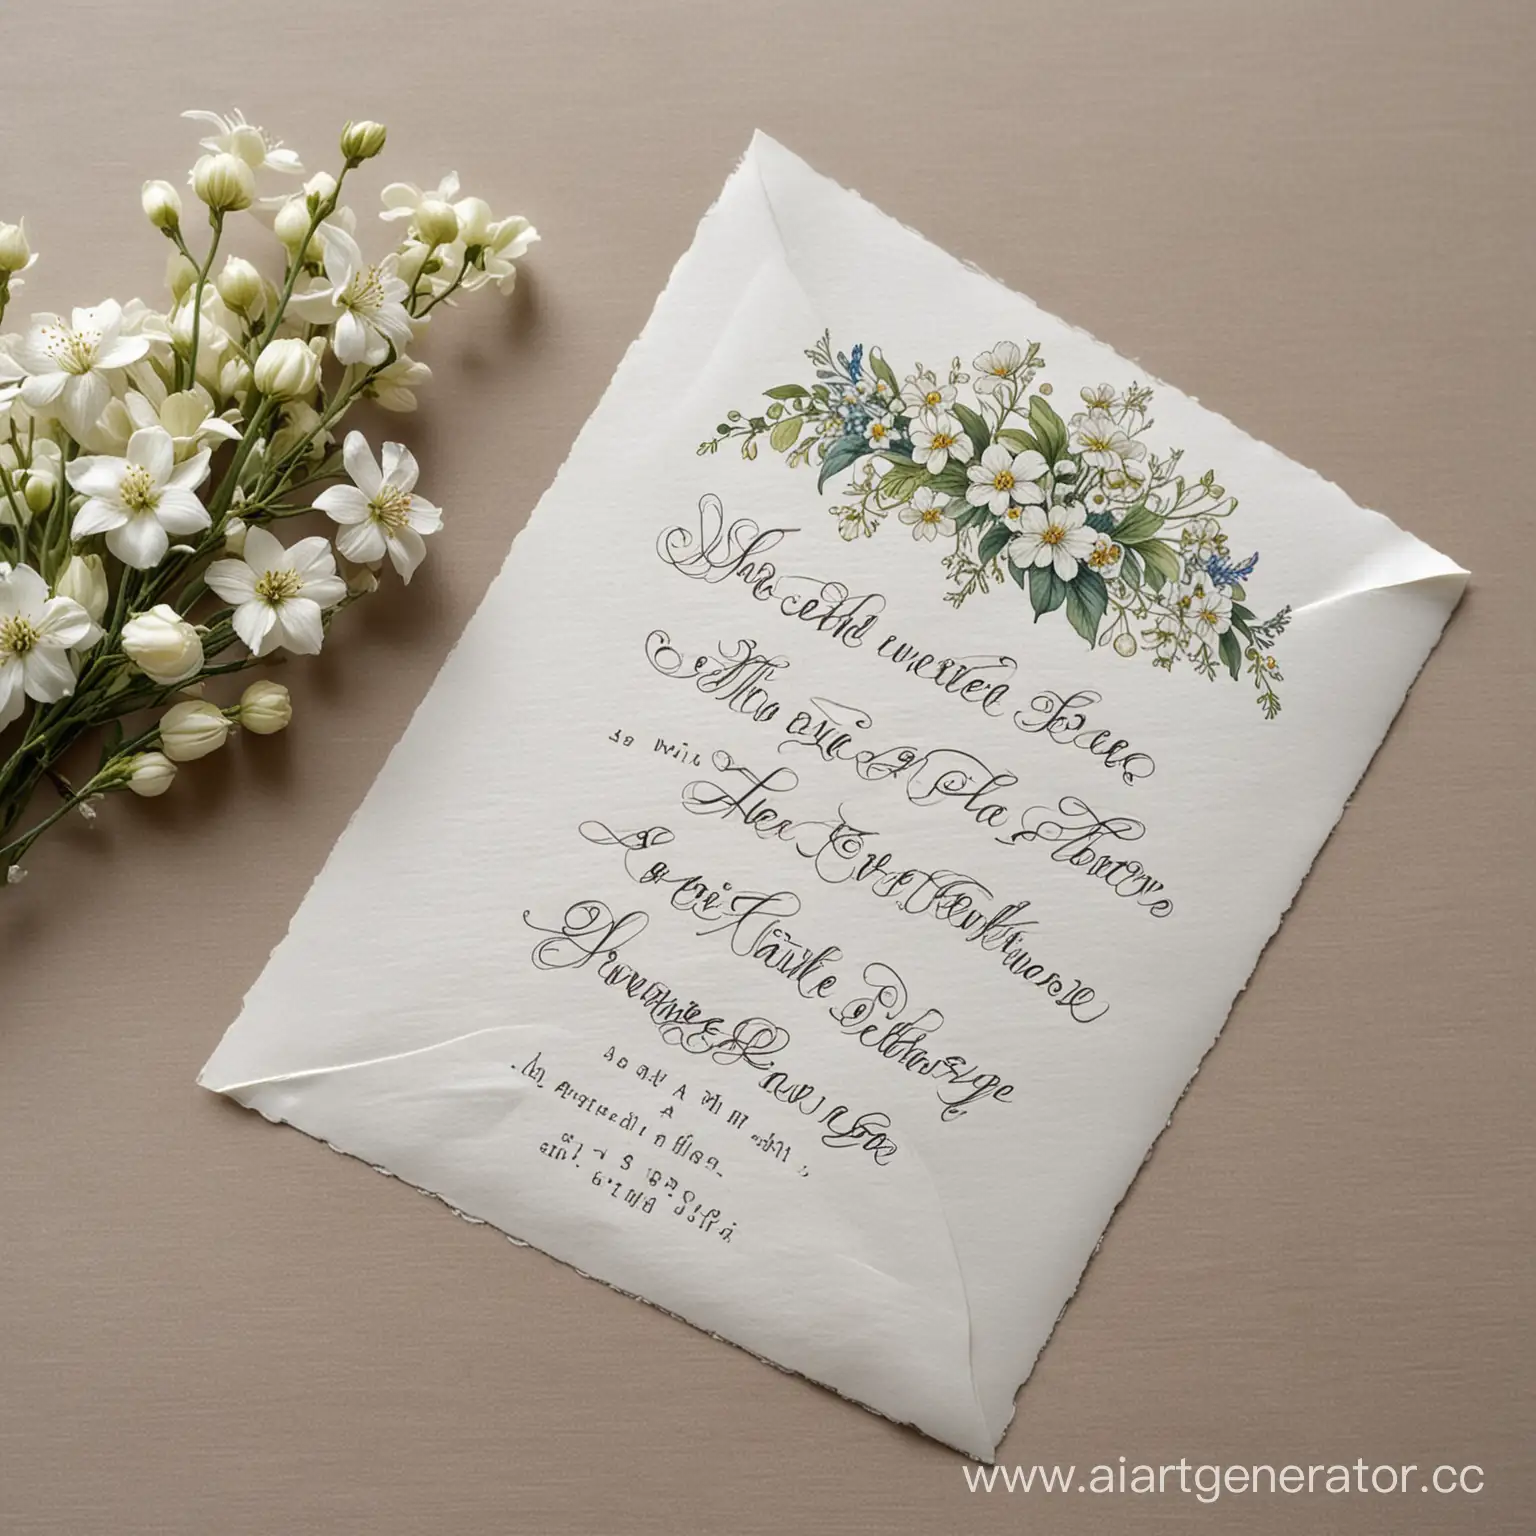 Collaborative-Fairy-Tale-Note-in-Russian-Calligraphy-with-Opened-Envelope-and-White-Flowers